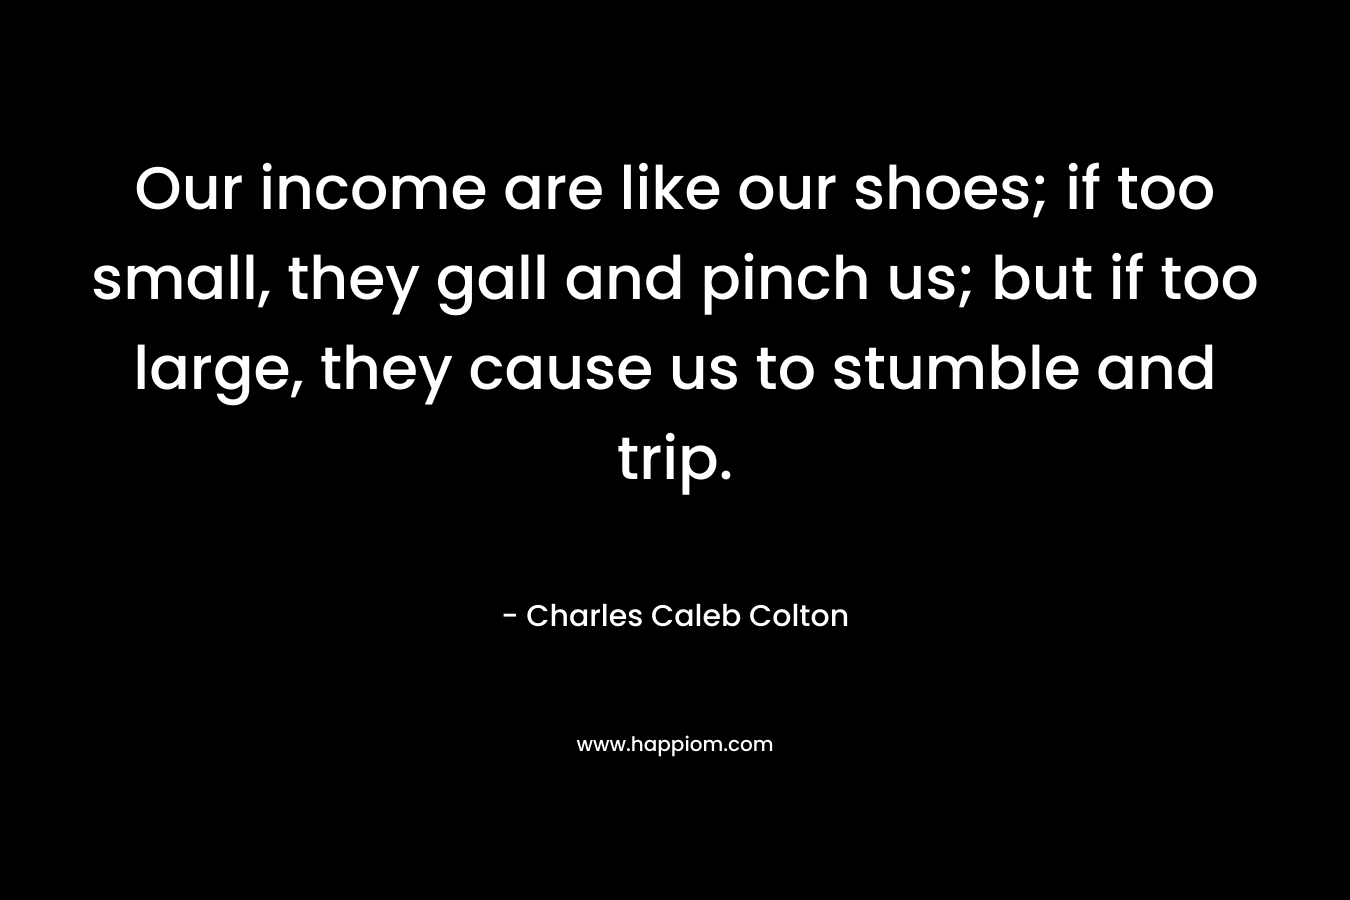 Our income are like our shoes; if too small, they gall and pinch us; but if too large, they cause us to stumble and trip. – Charles Caleb Colton